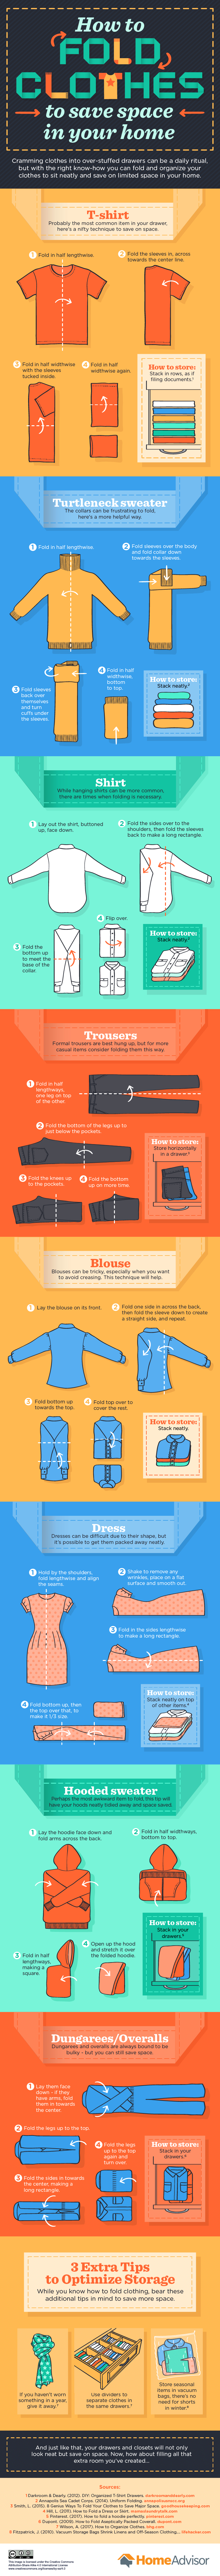 How To Fold A Shirt Origami Clothing Origami Save Space With The Ancient Art Of Folding Daily